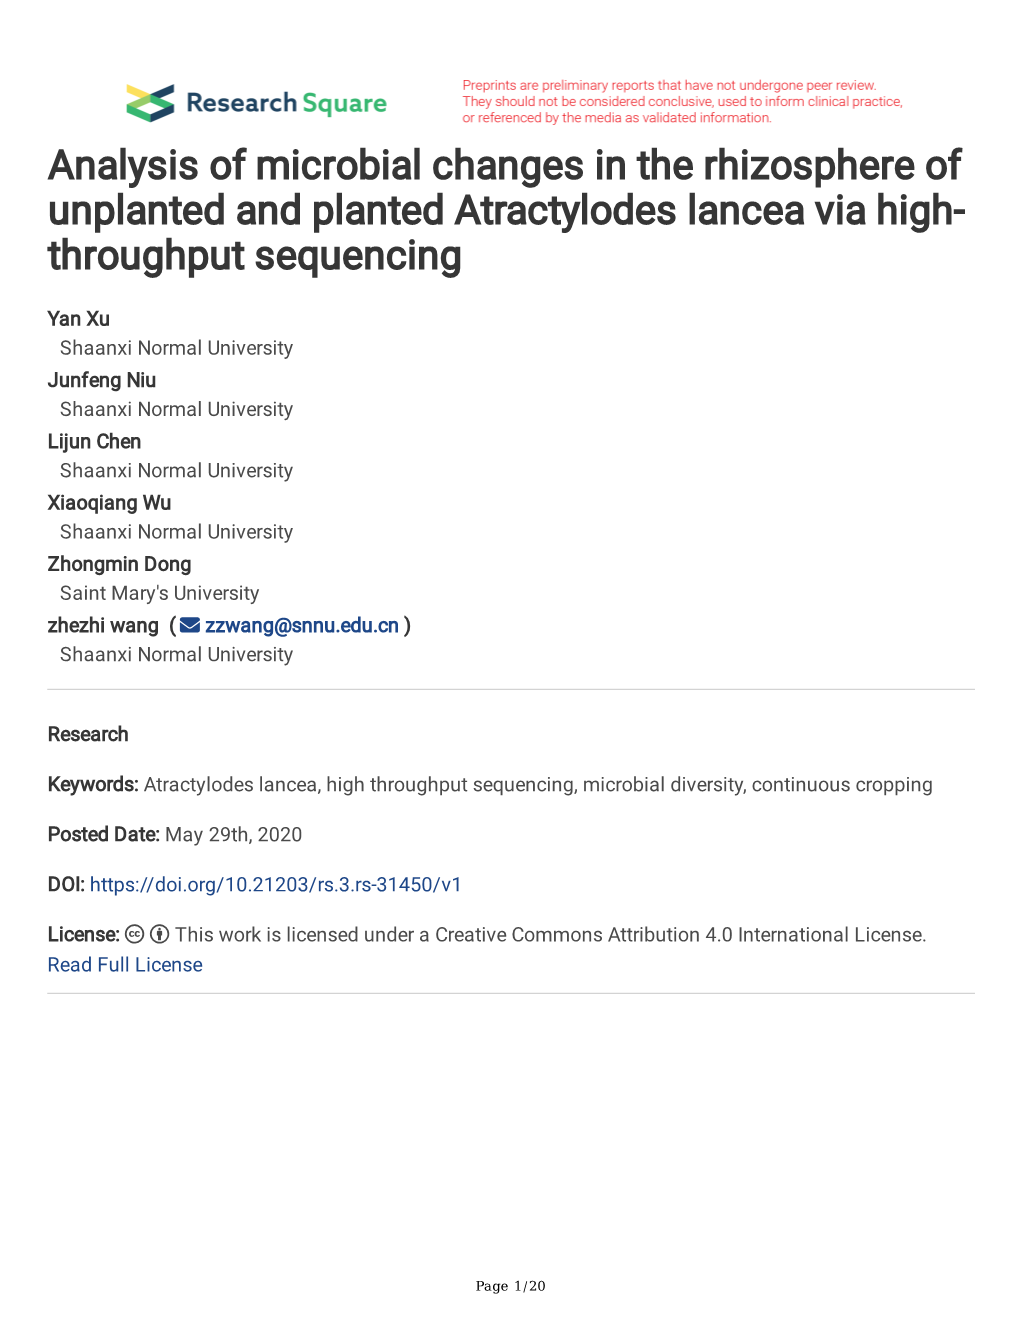 Analysis of Microbial Changes in the Rhizosphere of Unplanted and Planted Atractylodes Lancea Via High- Throughput Sequencing